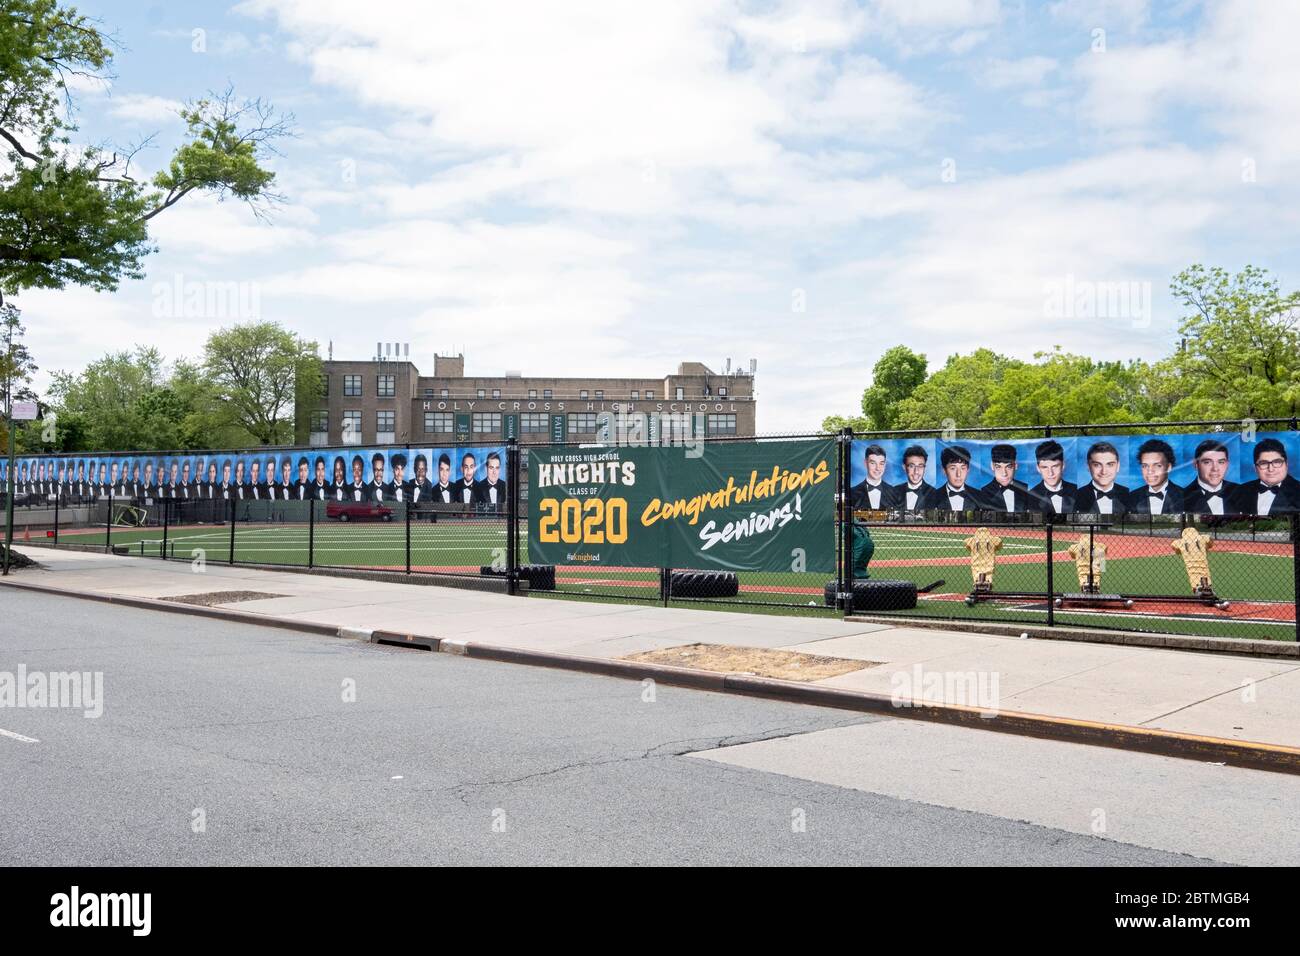 In lieu of a graduation ceremony, Holy Cross High School hung a banner and photos of the graduating seniors. In Flushing, Queens, New York. Stock Photo